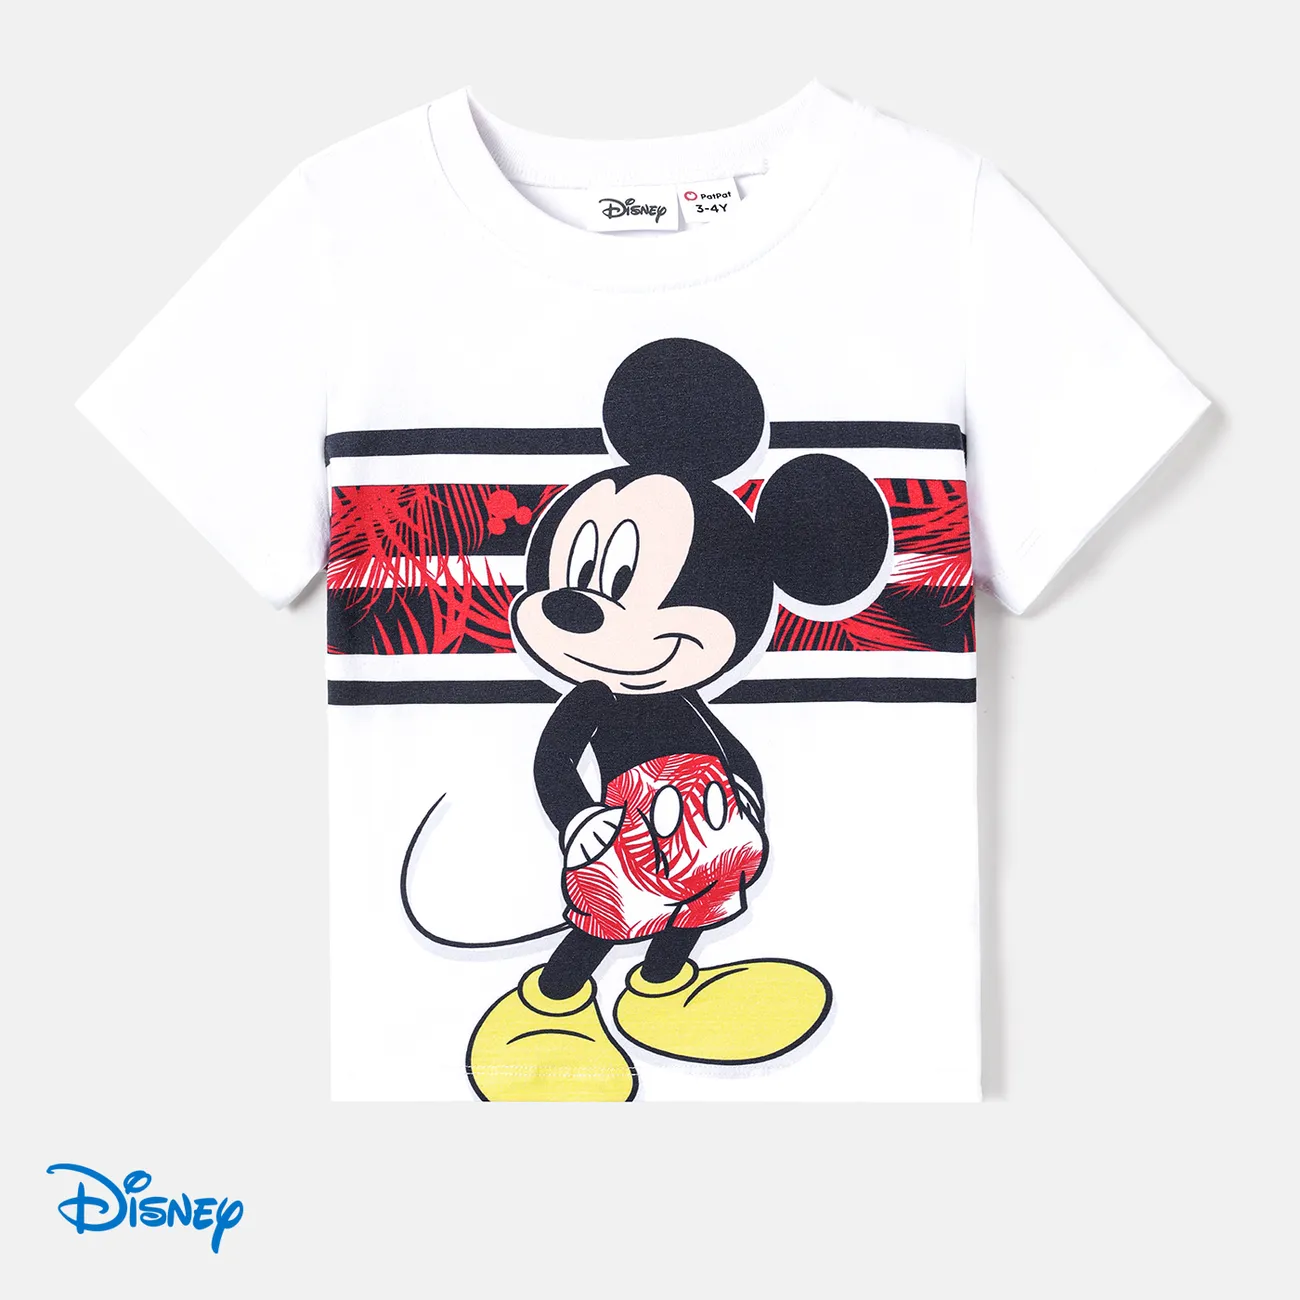 Disney Mickey and Friends Muttertag Familien-Looks Kurzärmelig Familien-Outfits Sets rot big image 1